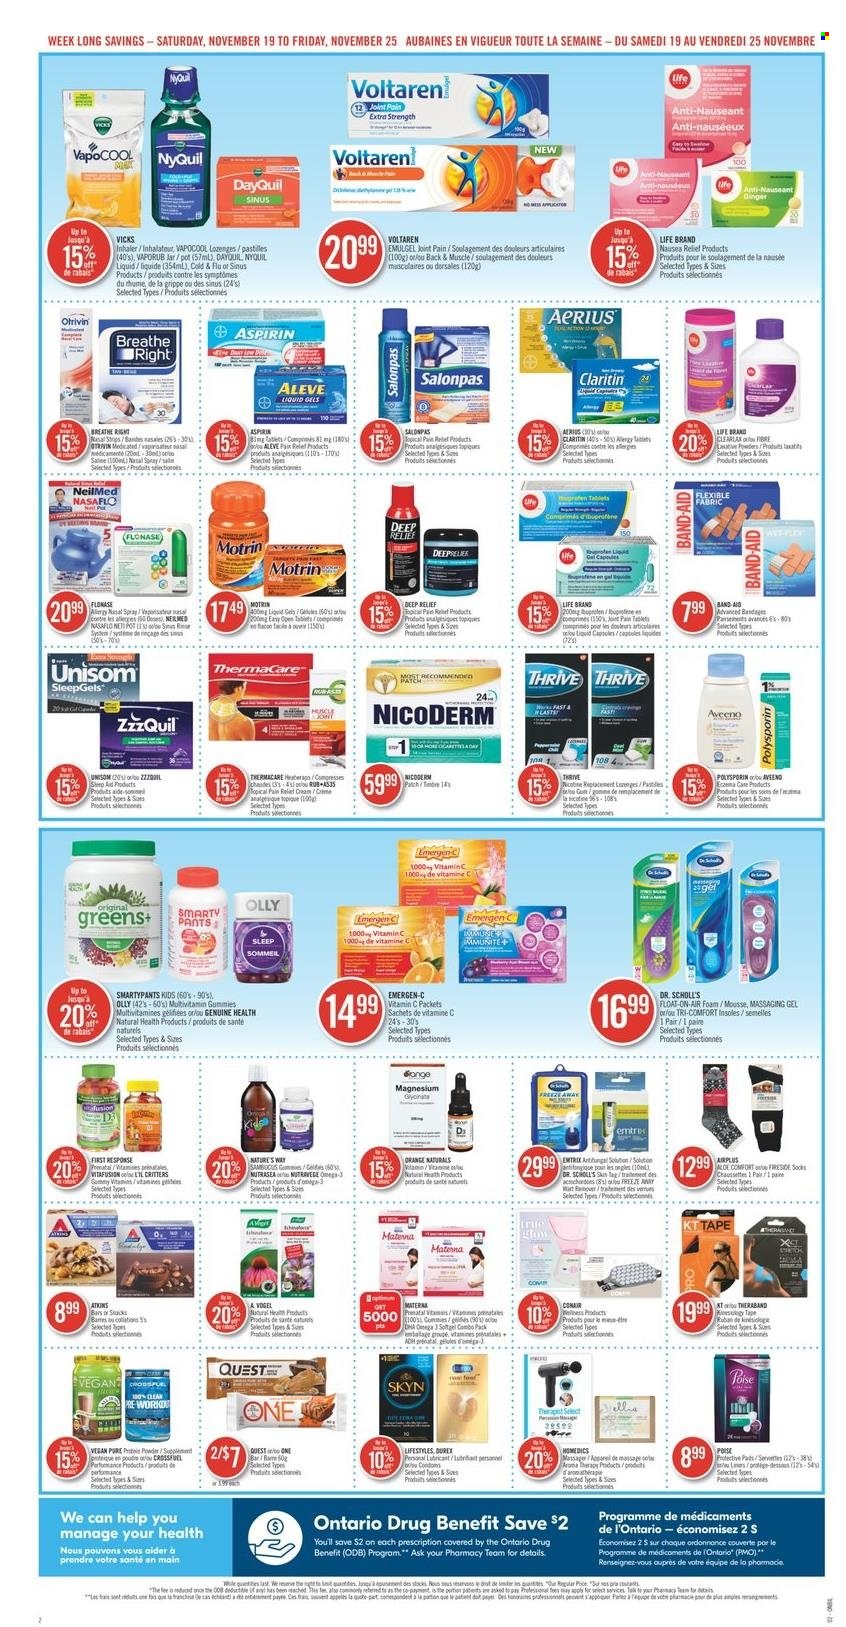 thumbnail - Shoppers Drug Mart Flyer - November 17, 2022 - November 25, 2022 - Sales products - snack, pastilles, ginger, pepper, pants, Vicks, pot, jar, Optimum, massager, socks, pain relief, Aleve, DayQuil, Cold & Flu, magnesium, multivitamin, NicoDerm, Thermacare, Unisom, Vitafusion, vitamin c, ZzzQuil, Prenatal, NyQuil, Omega-3, Emergen-C, whey protein, VapoRub, aspirin, nasal spray, Motrin, Dr. Scholl's, band-aid. Page 3.